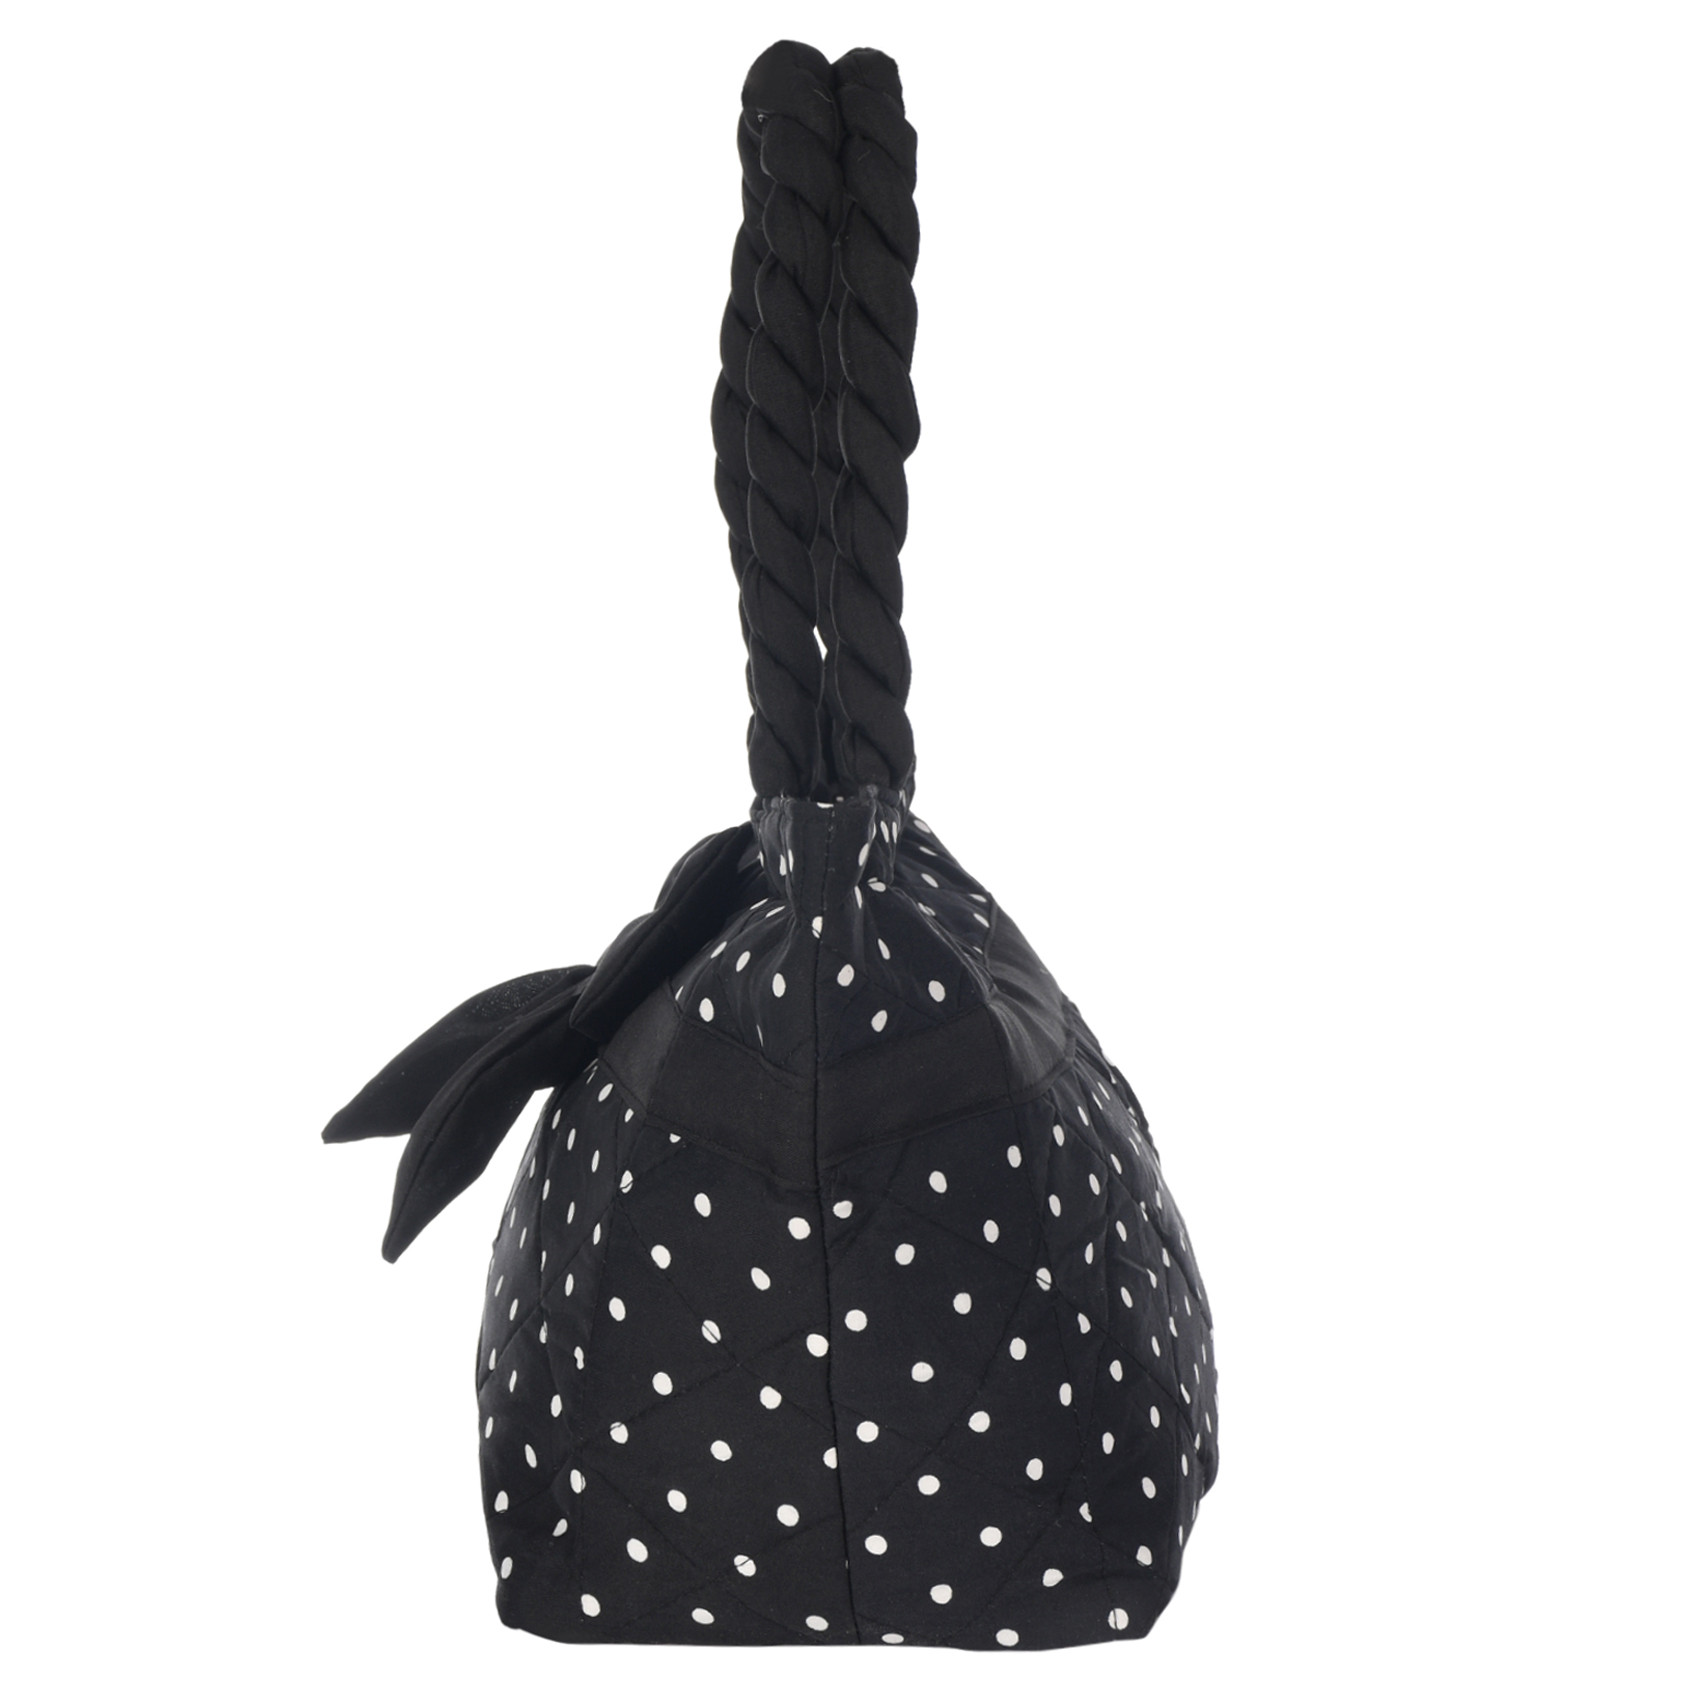 Kuber Industries Dot Print Hand Bag, Bow Bag For Women/Girls With Handle (Black)